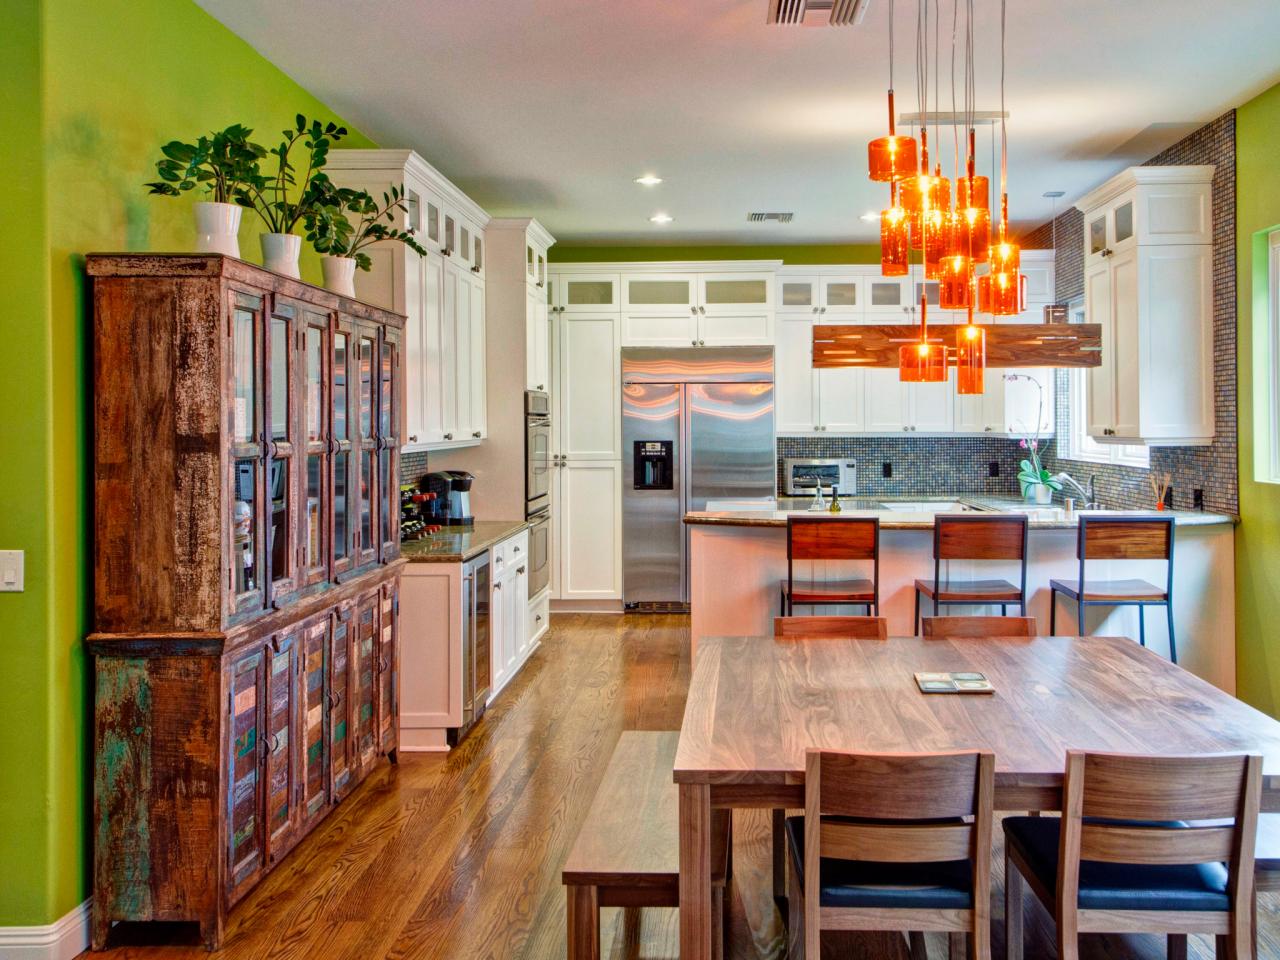 Green Eclectic Kitchen With Orange Pendant Lamps